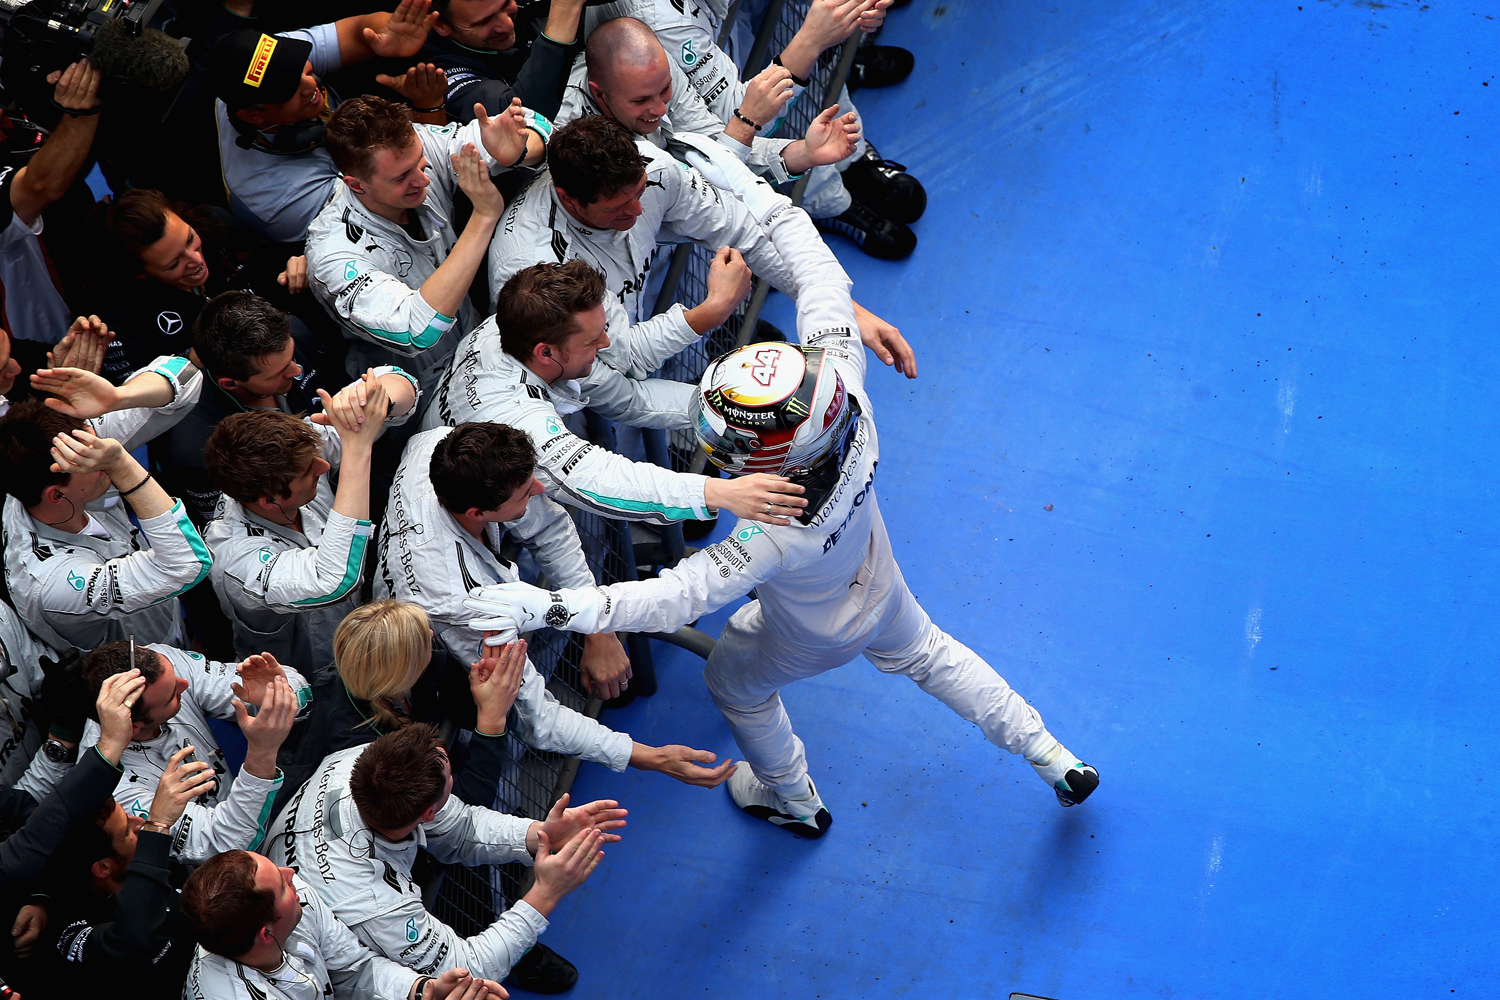 Lewis Hamilton of Great Britain and Mercedes GP celebrates his victory with his team following the Chinese Formula One Grand Prix at the Shanghai International Circuit on April 20, 2014 in Shanghai, China.